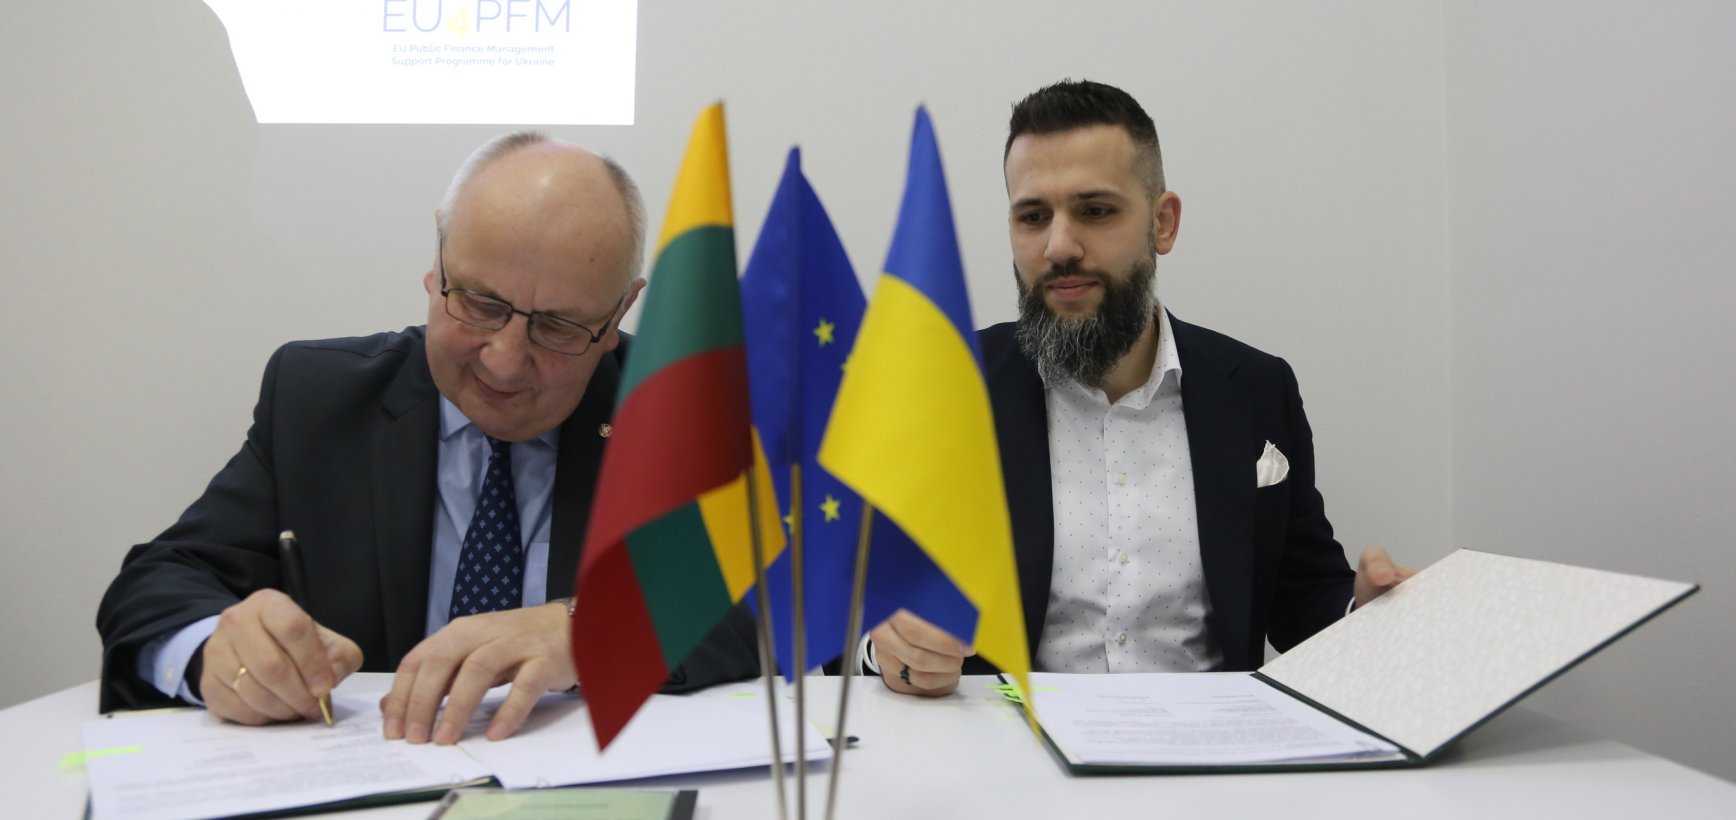 International project in Ukraine is moving forward